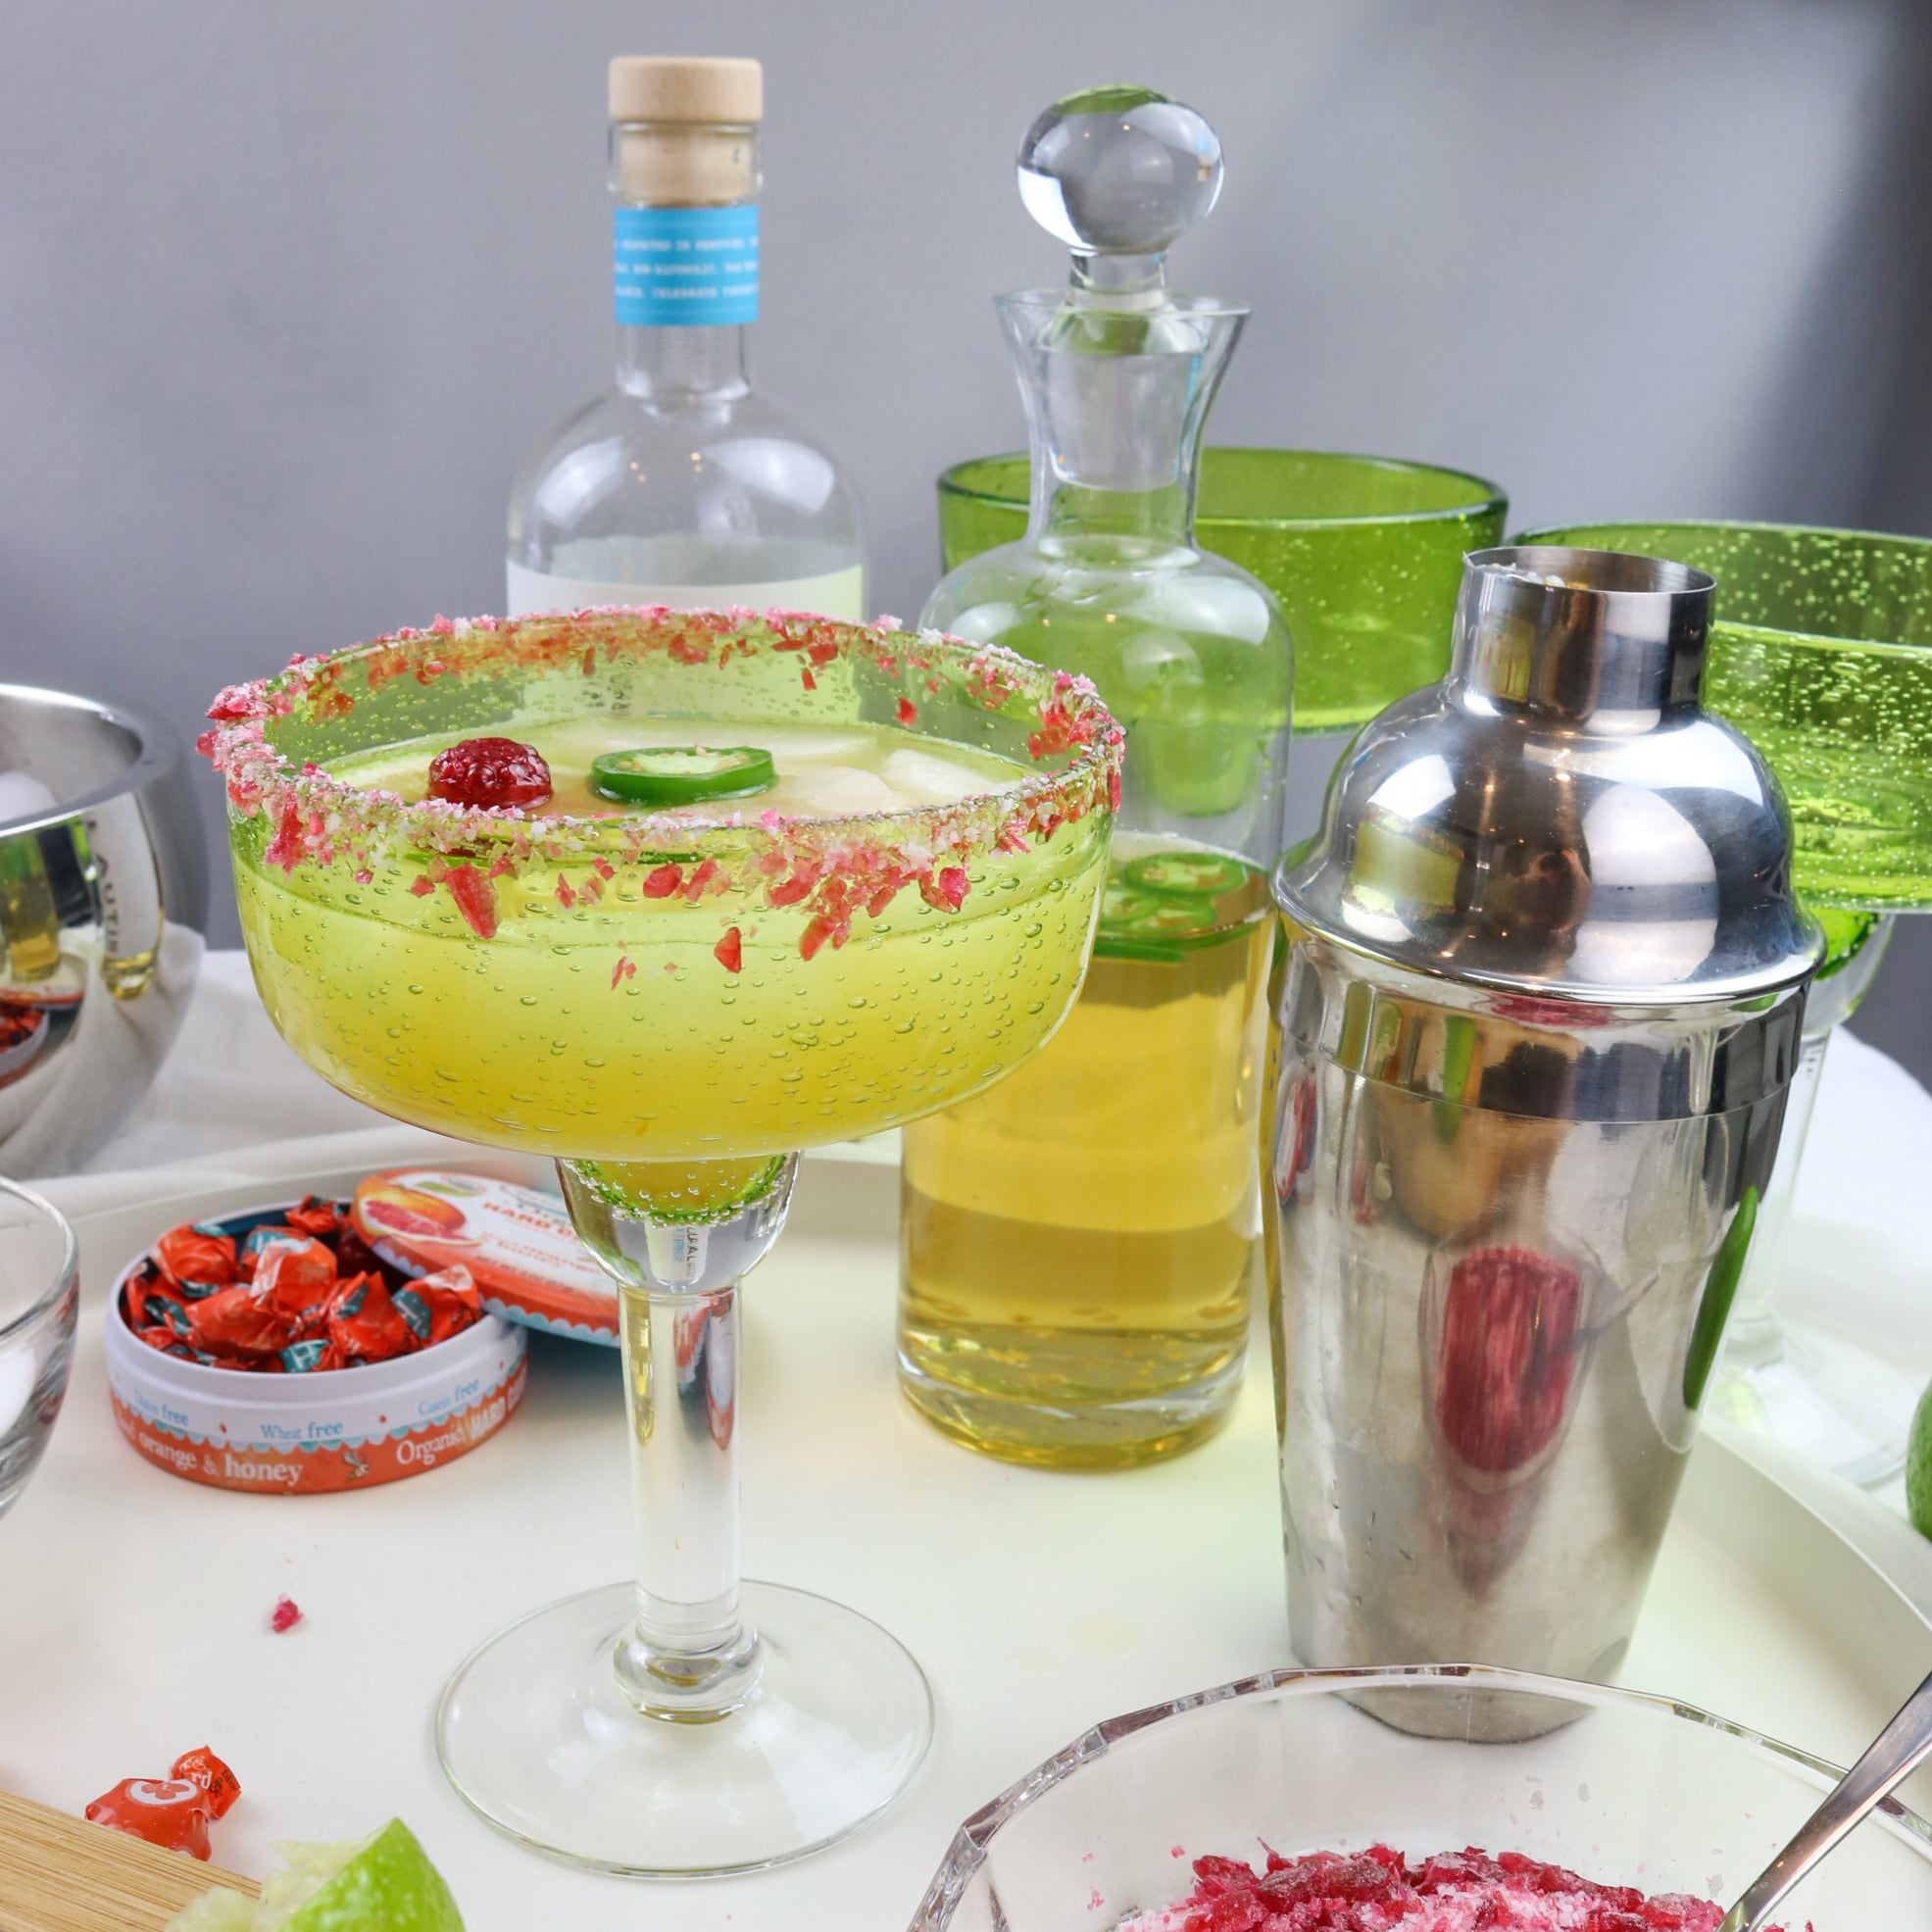 Rimmed tequila glass and mixing shaker on table with tequila and hard candies